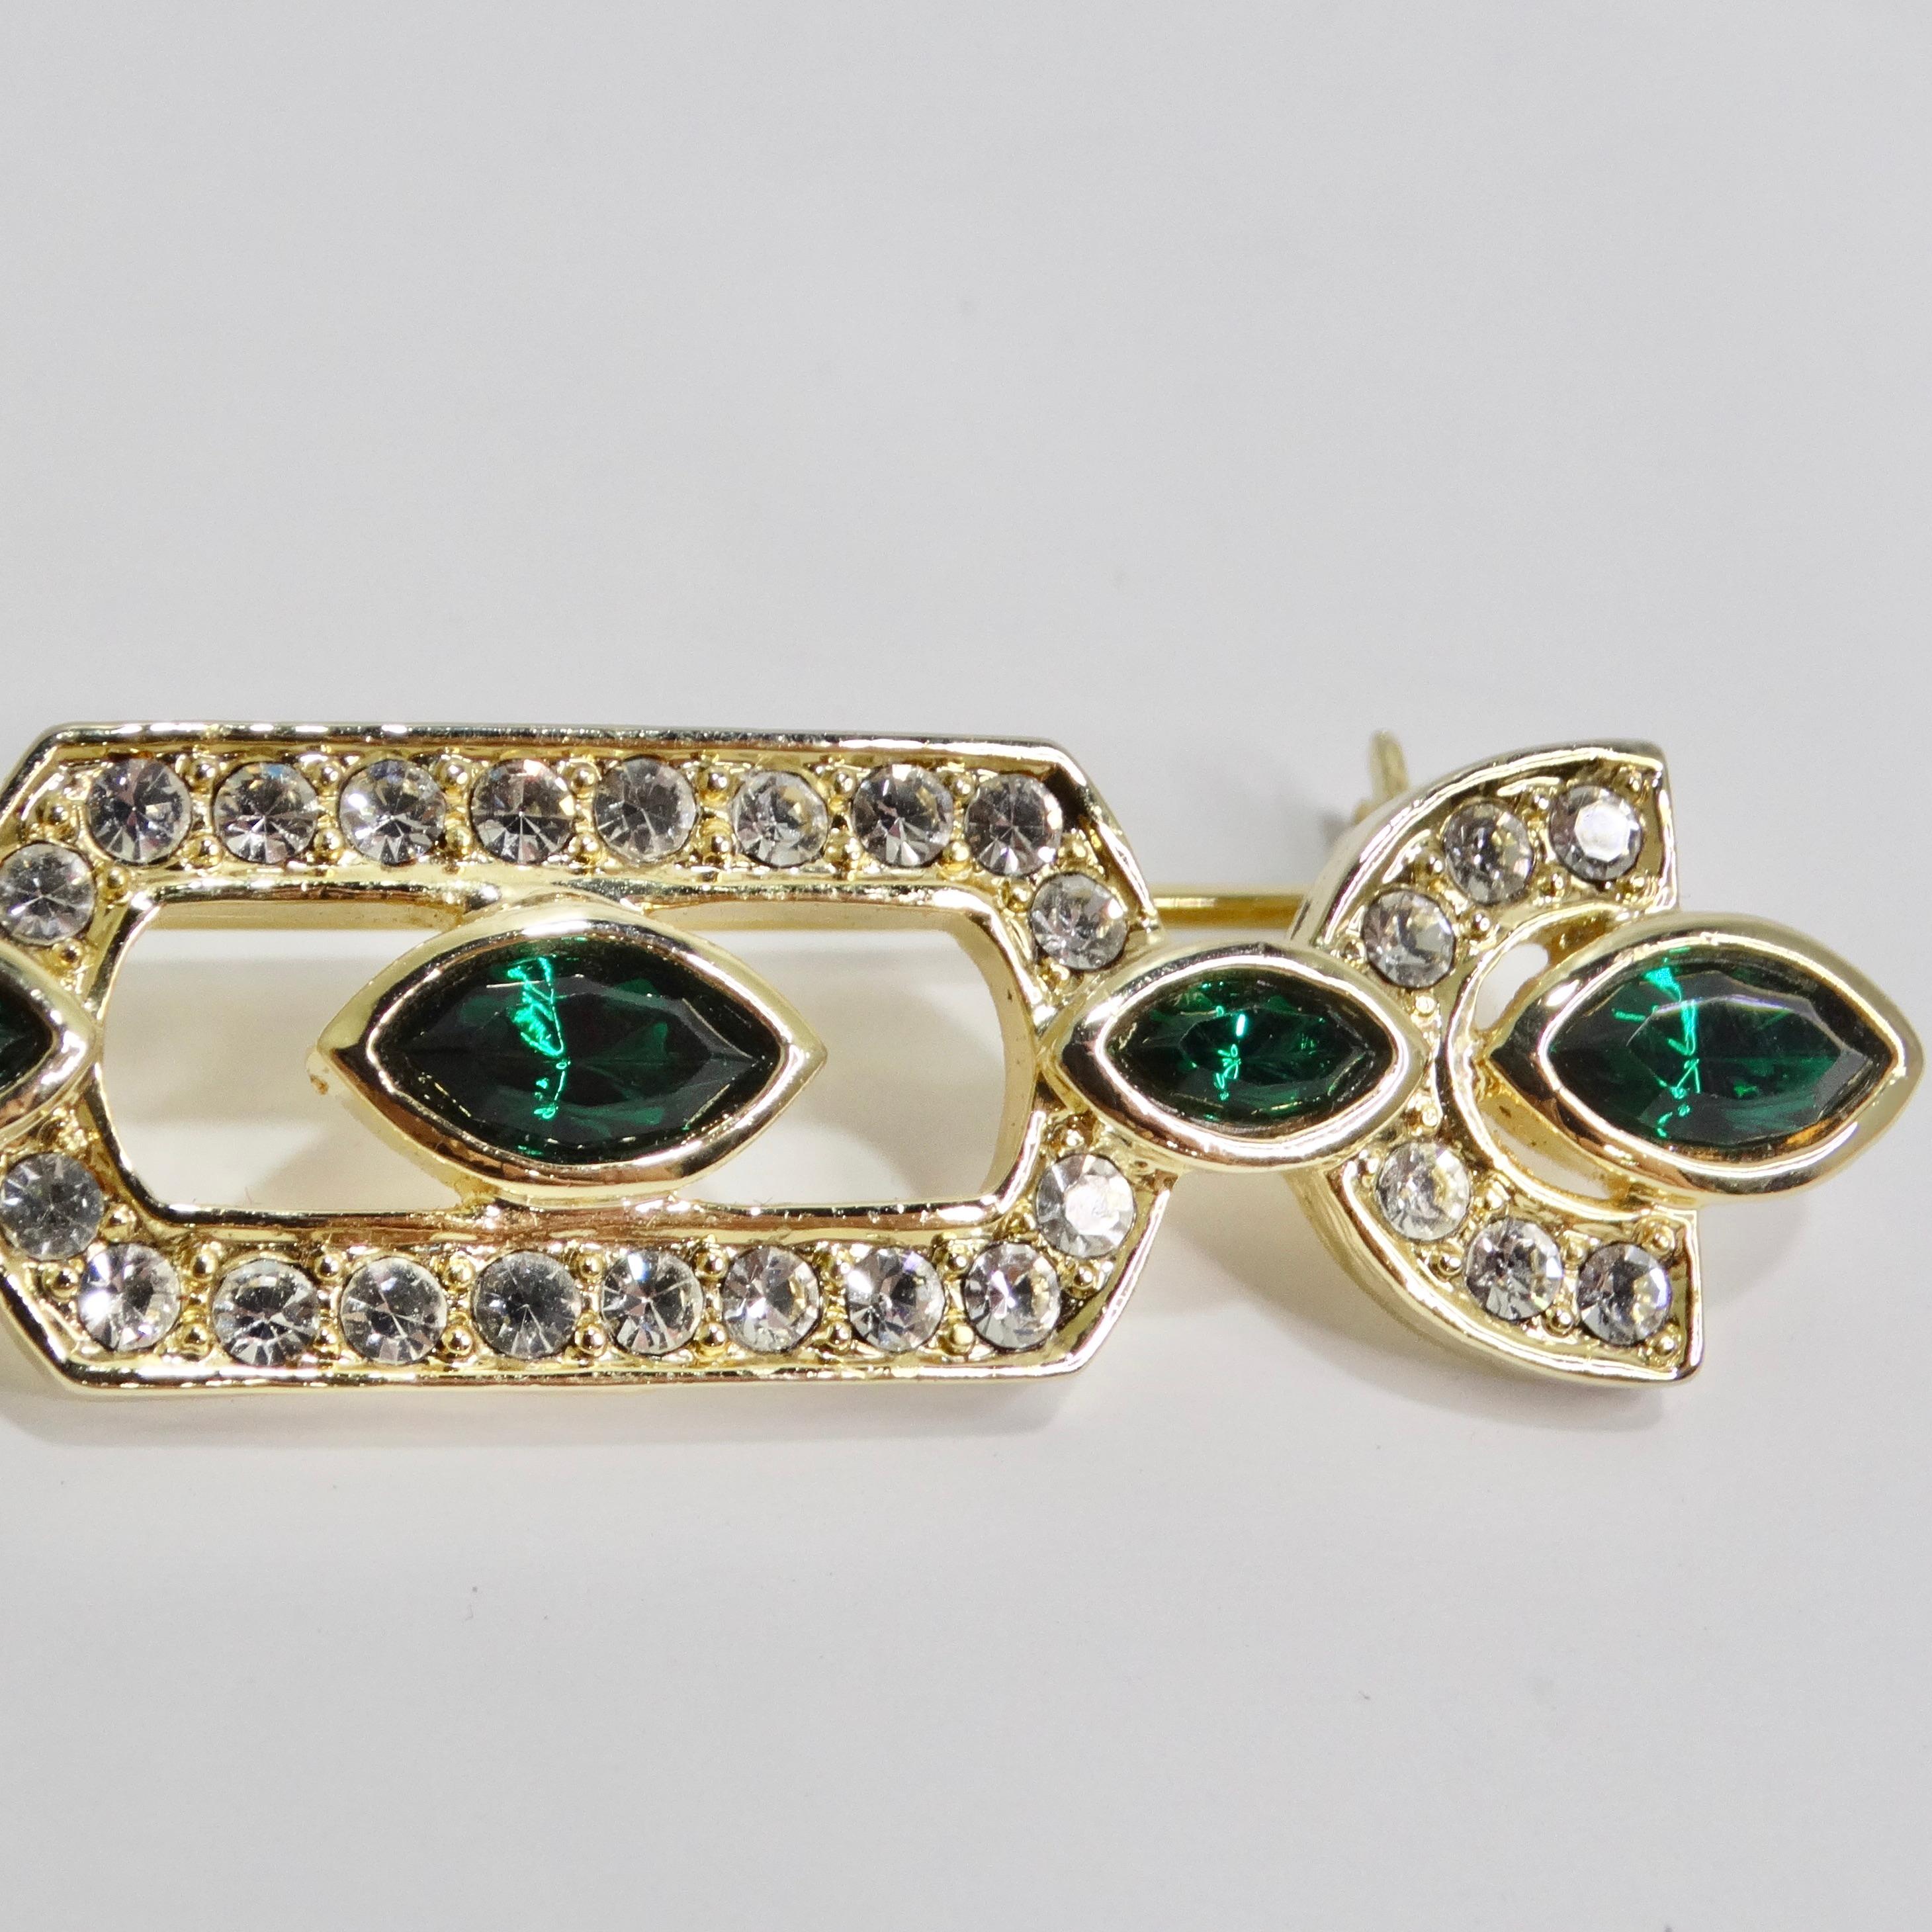 1980s 18K Gold Plated Synthetic Emerald Brooch In Excellent Condition For Sale In Scottsdale, AZ